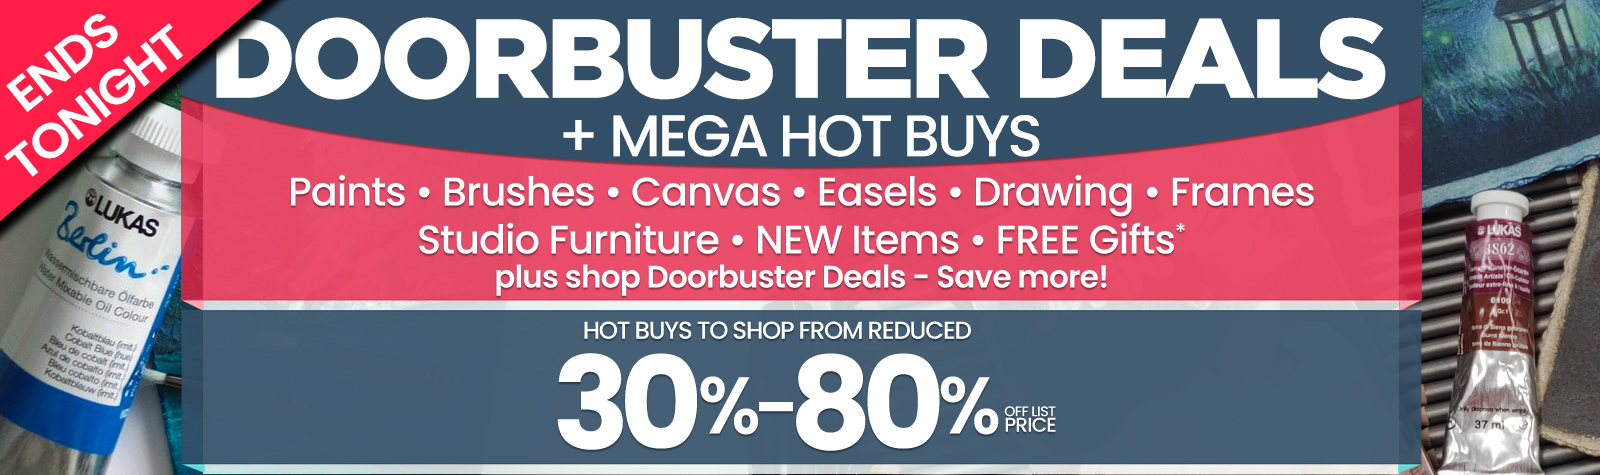 Hot Buys Mega Deals - Save up to 80% Off List - Limited Time Sale